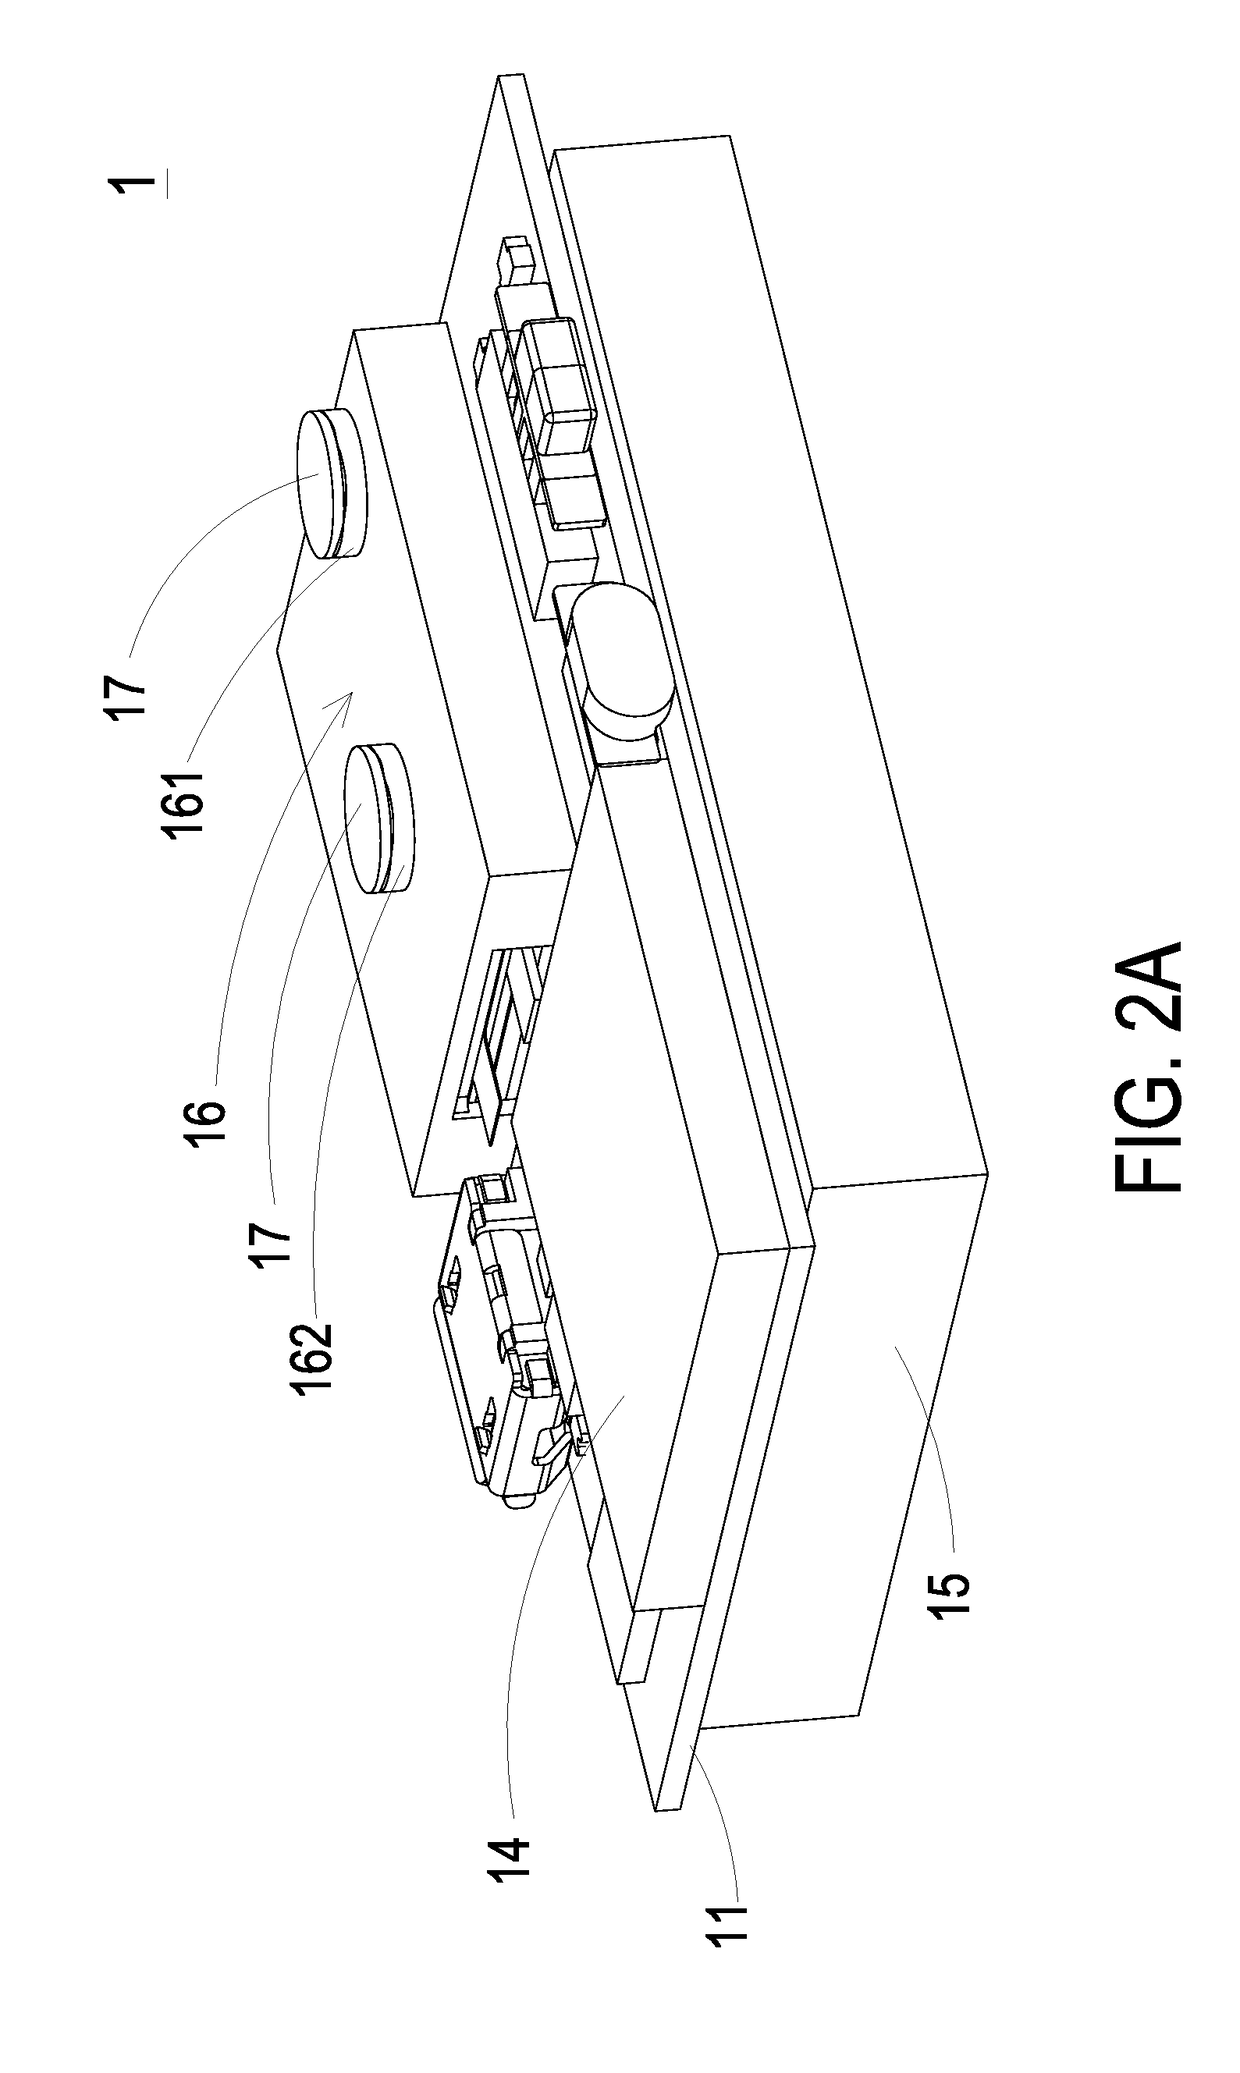 Device having actuating and sensing module